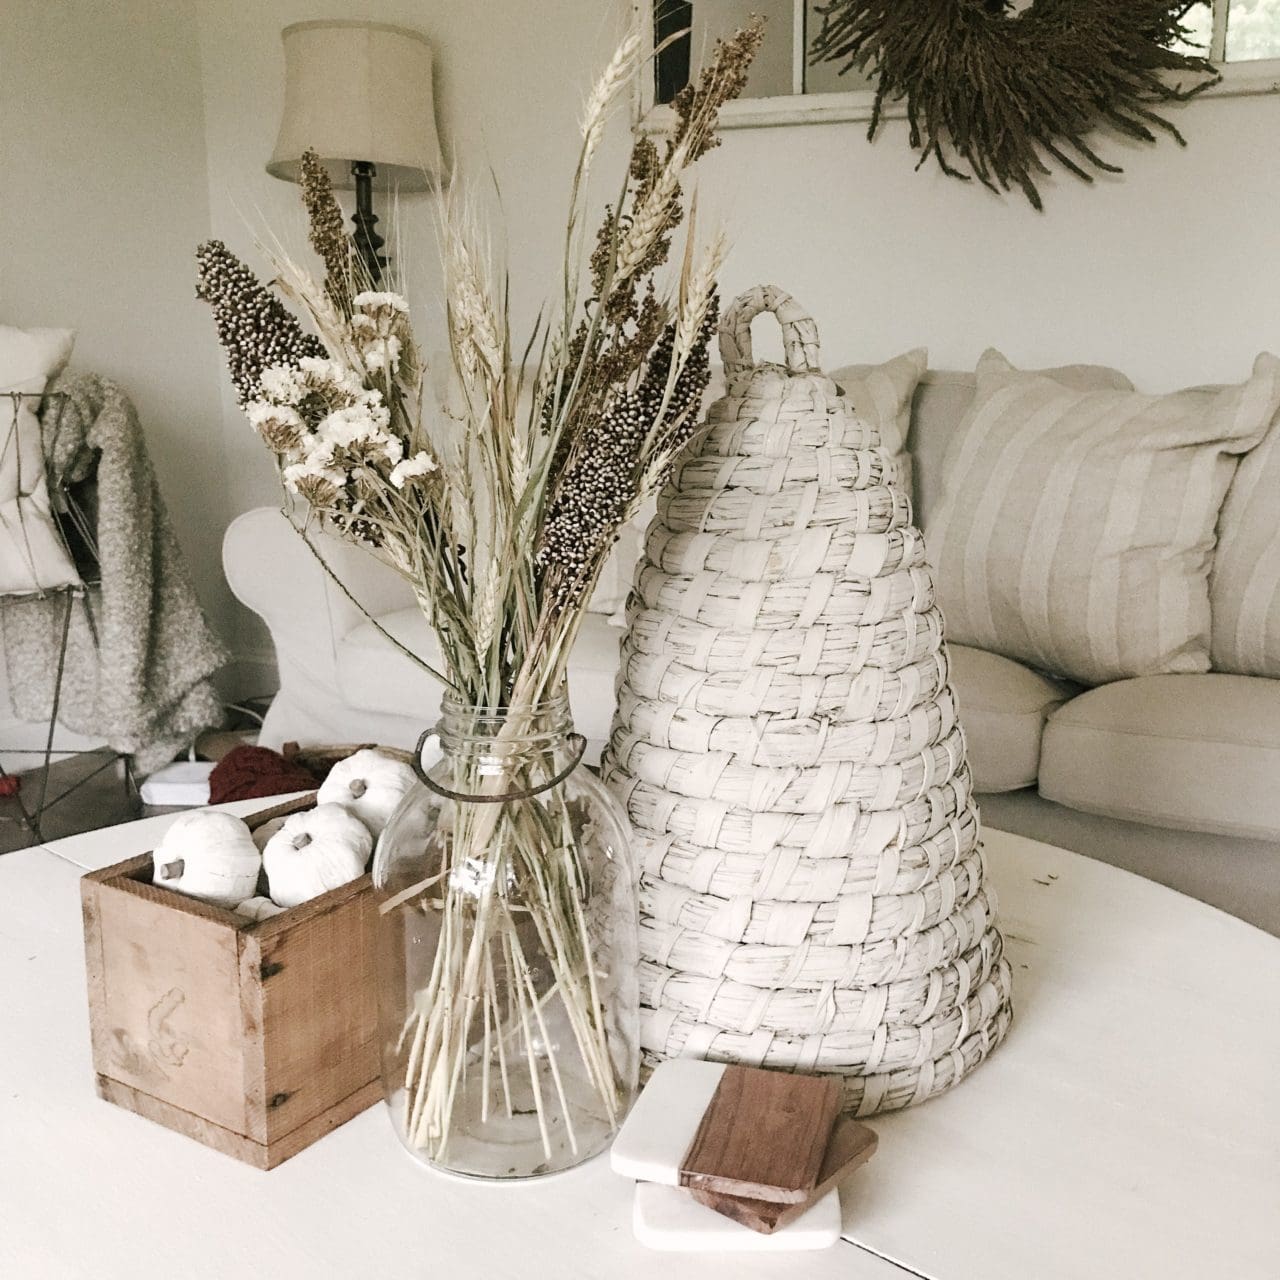 Neutral Living Room Decorated for Autumn with Dried Elements